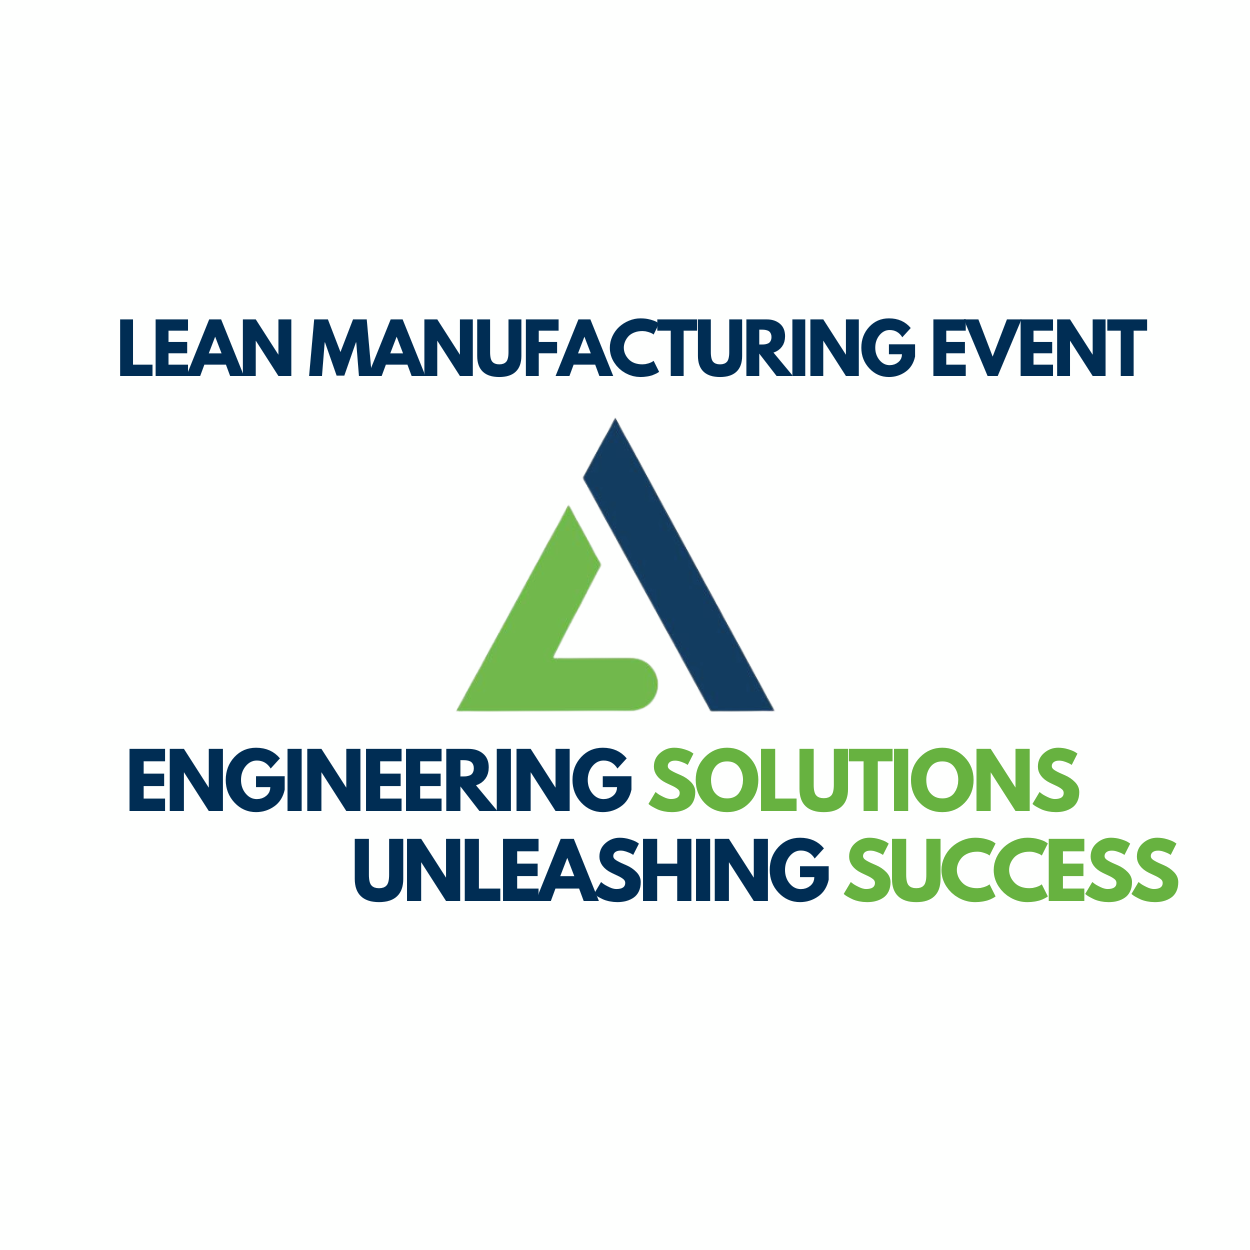 Featured image for “Lean Manufacturing Event”